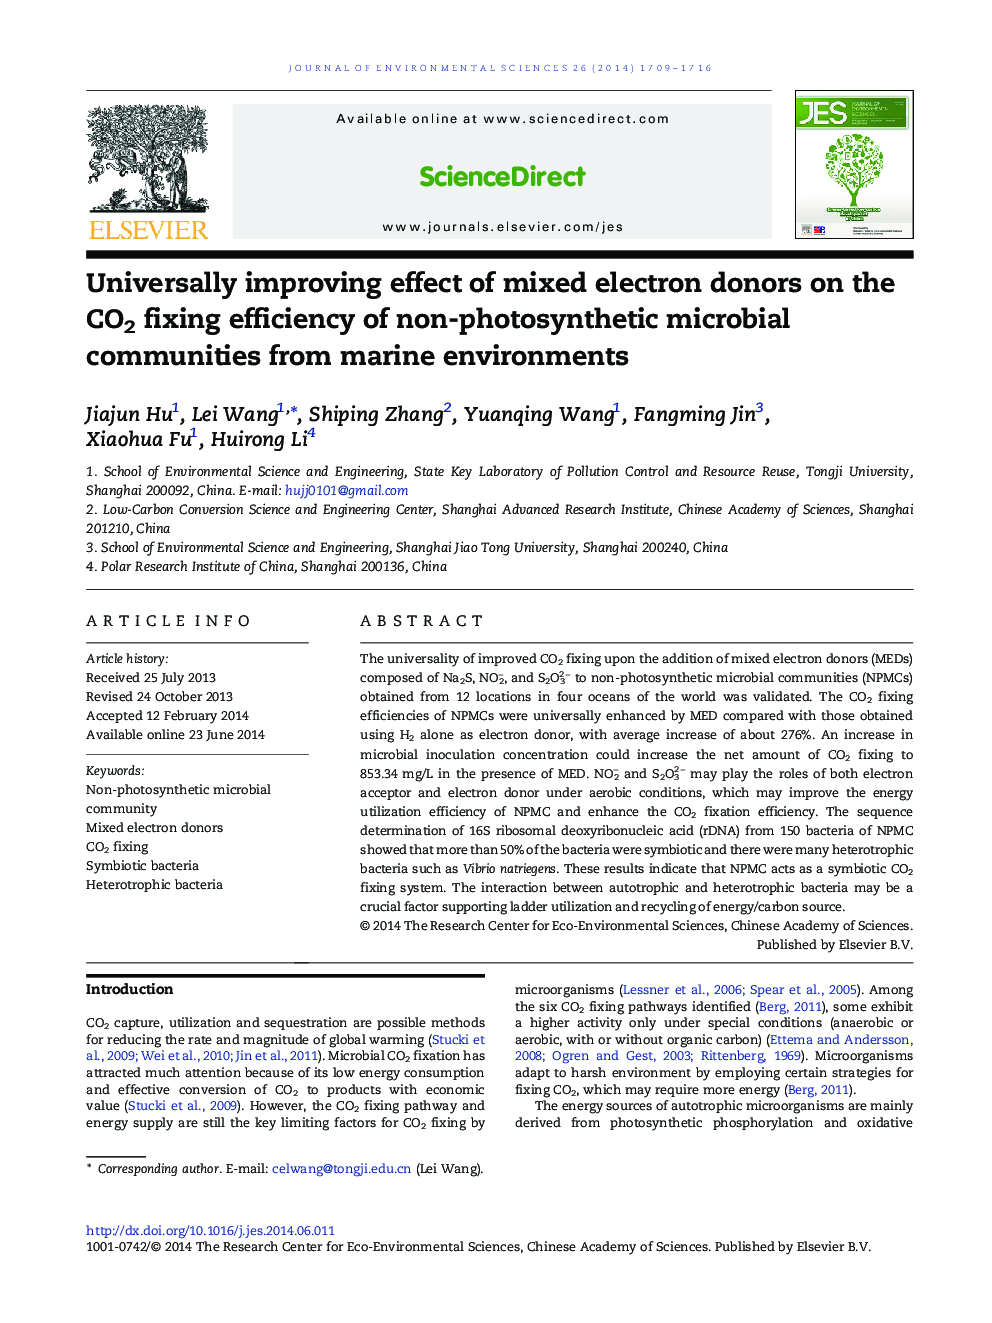 Universally improving effect of mixed electron donors on the CO2 fixing efficiency of non-photosynthetic microbial communities from marine environments